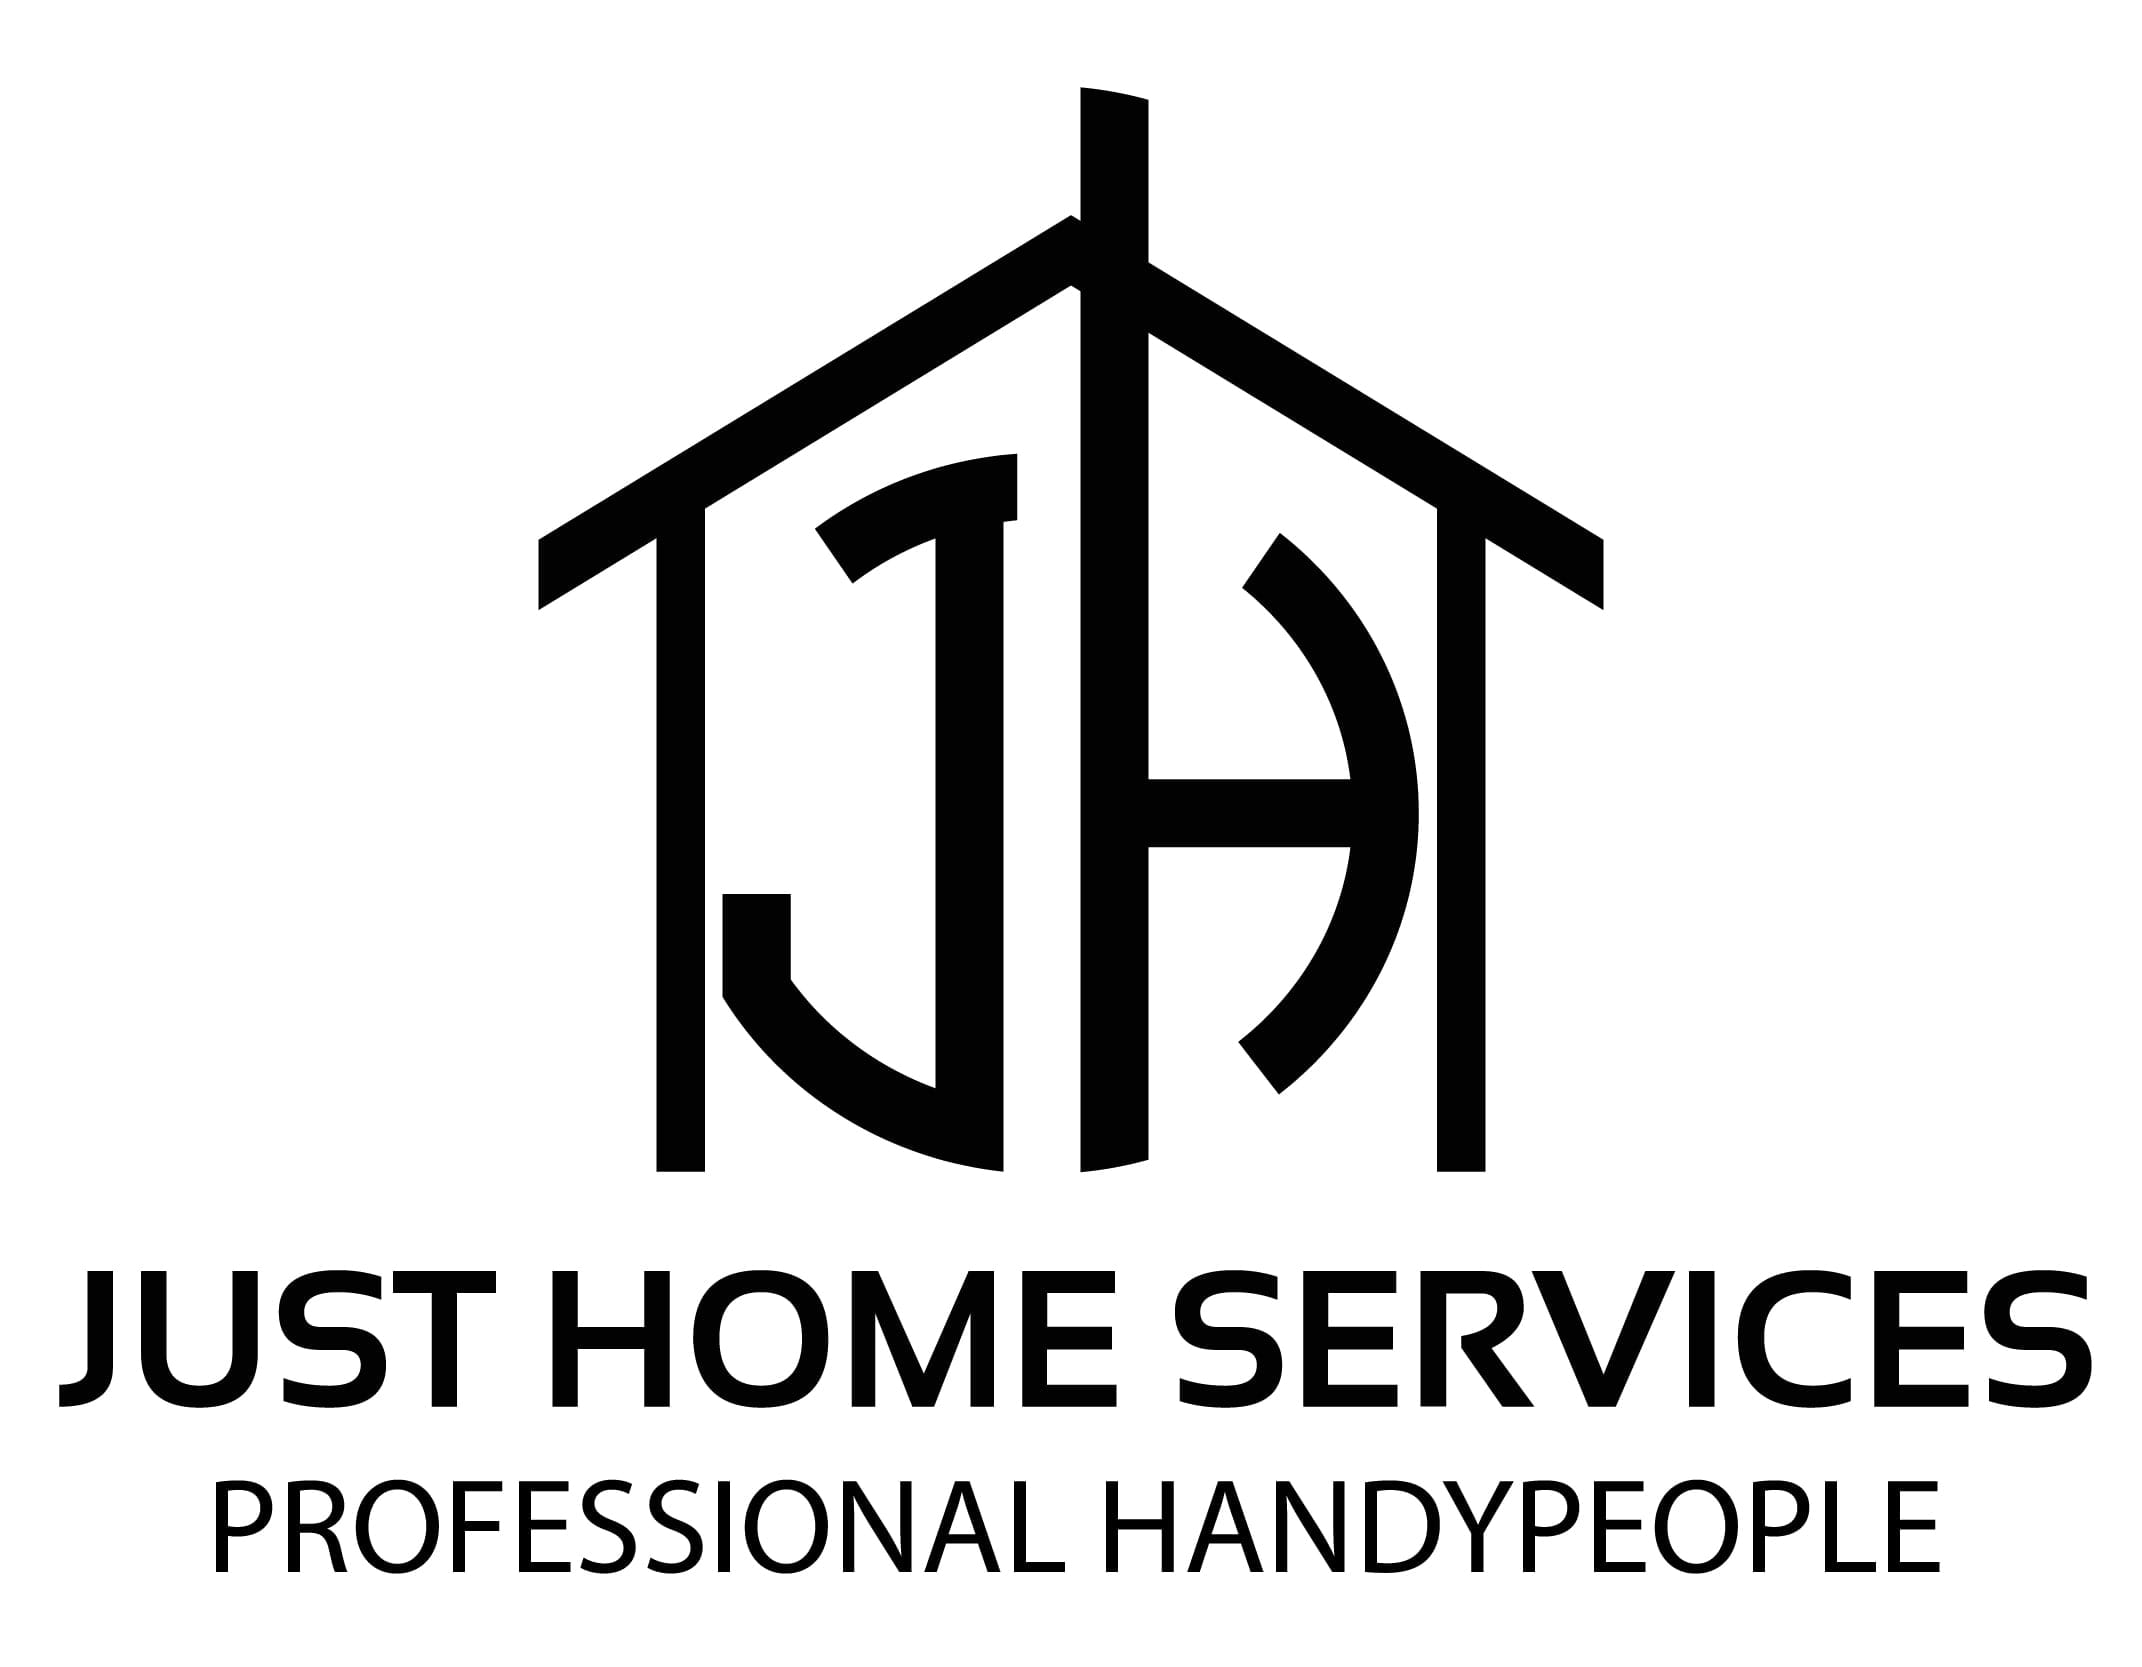 Just Home Services